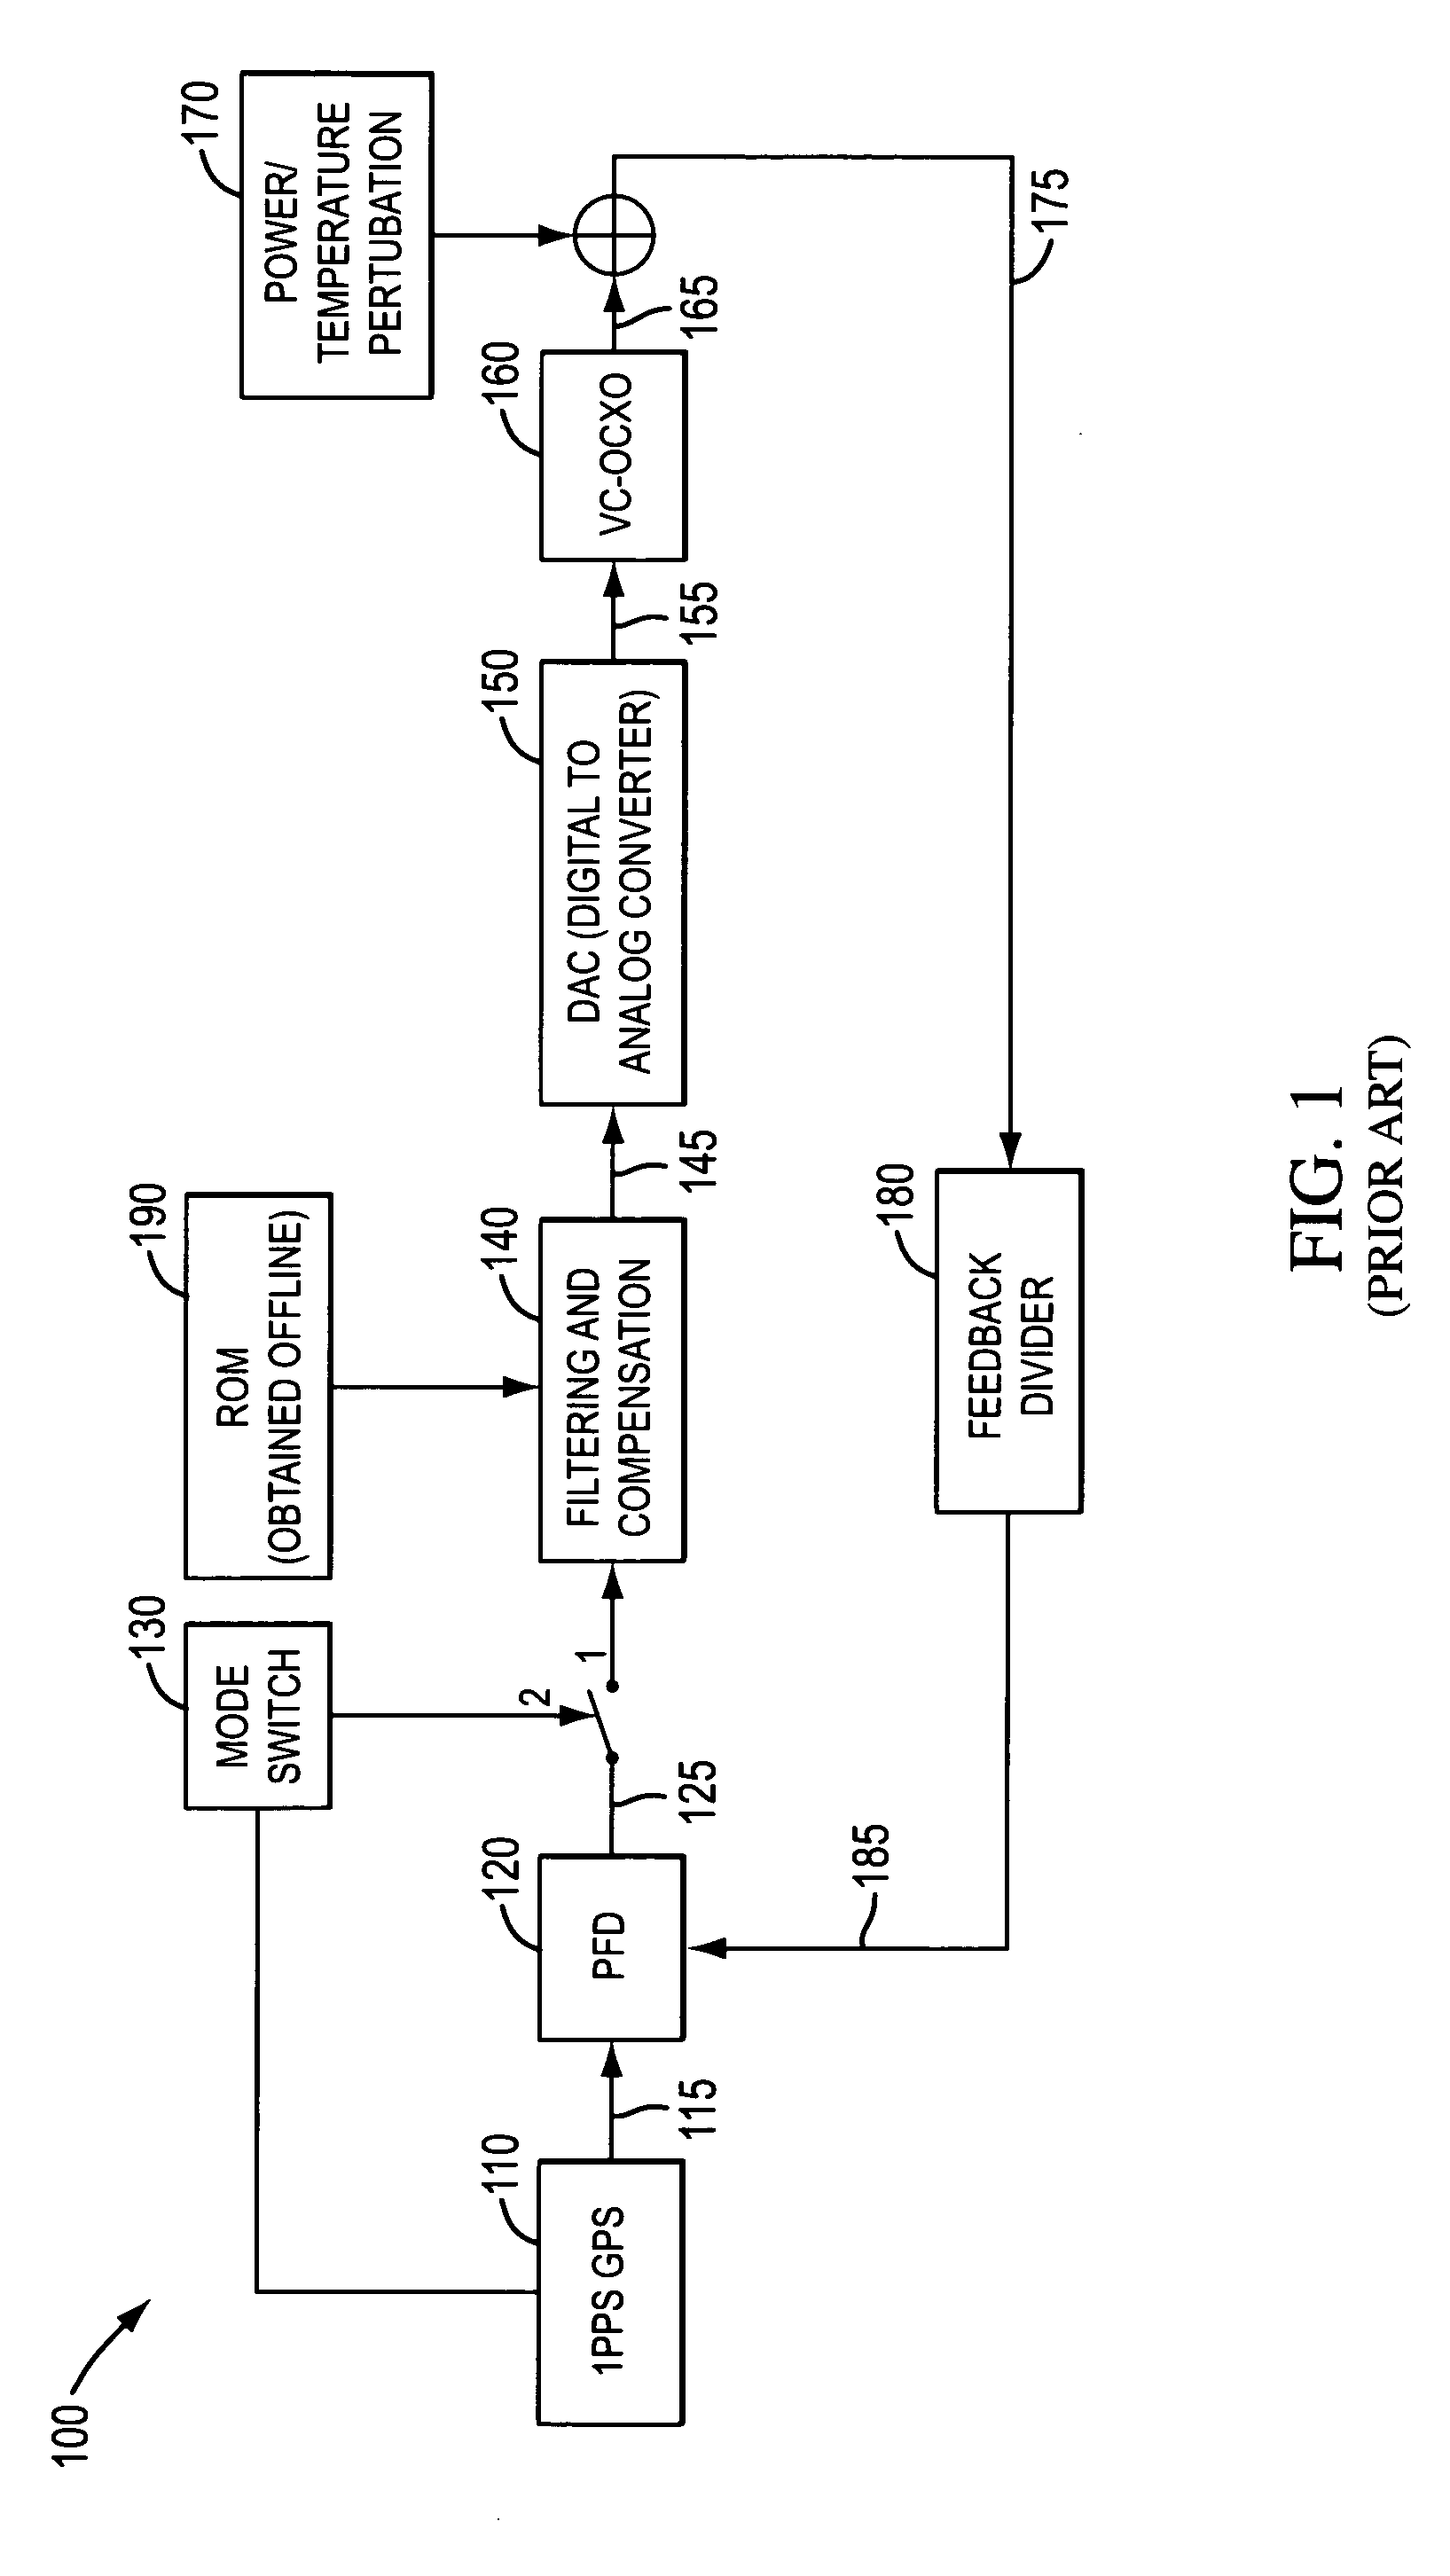 Digitally compensated highly stable holdover clock generation techniques using adaptive filtering